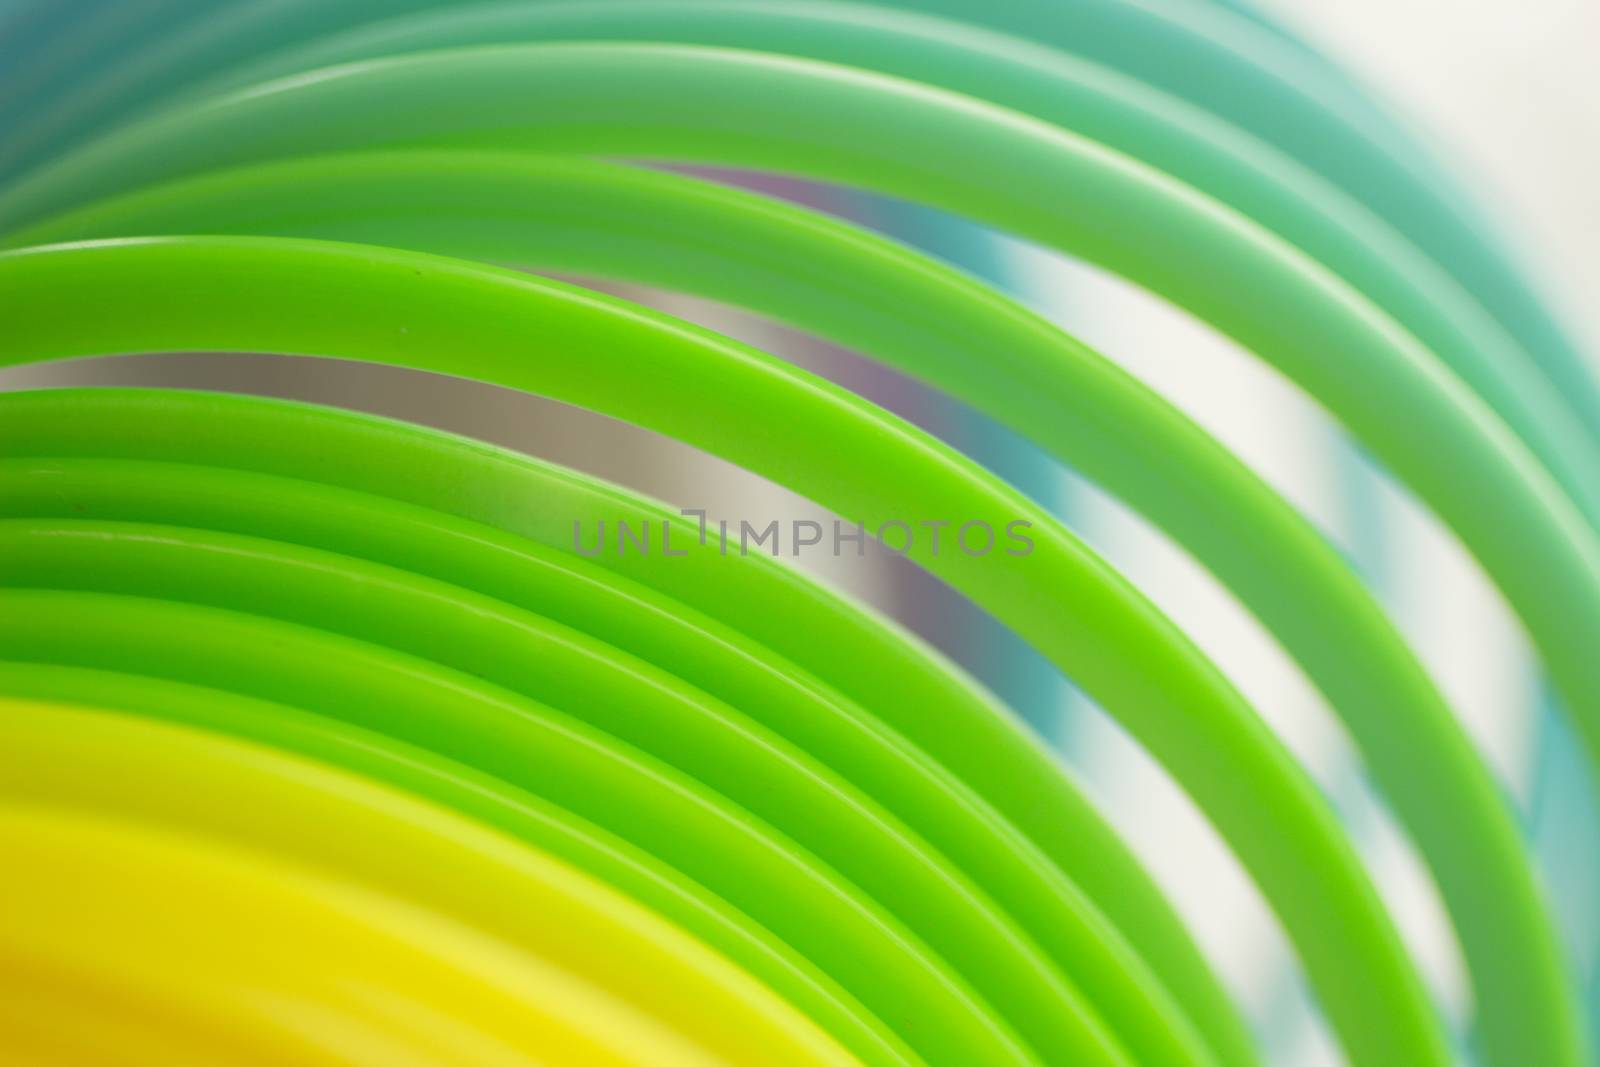 Colorful green color circular art swirl abstract by edwardolive